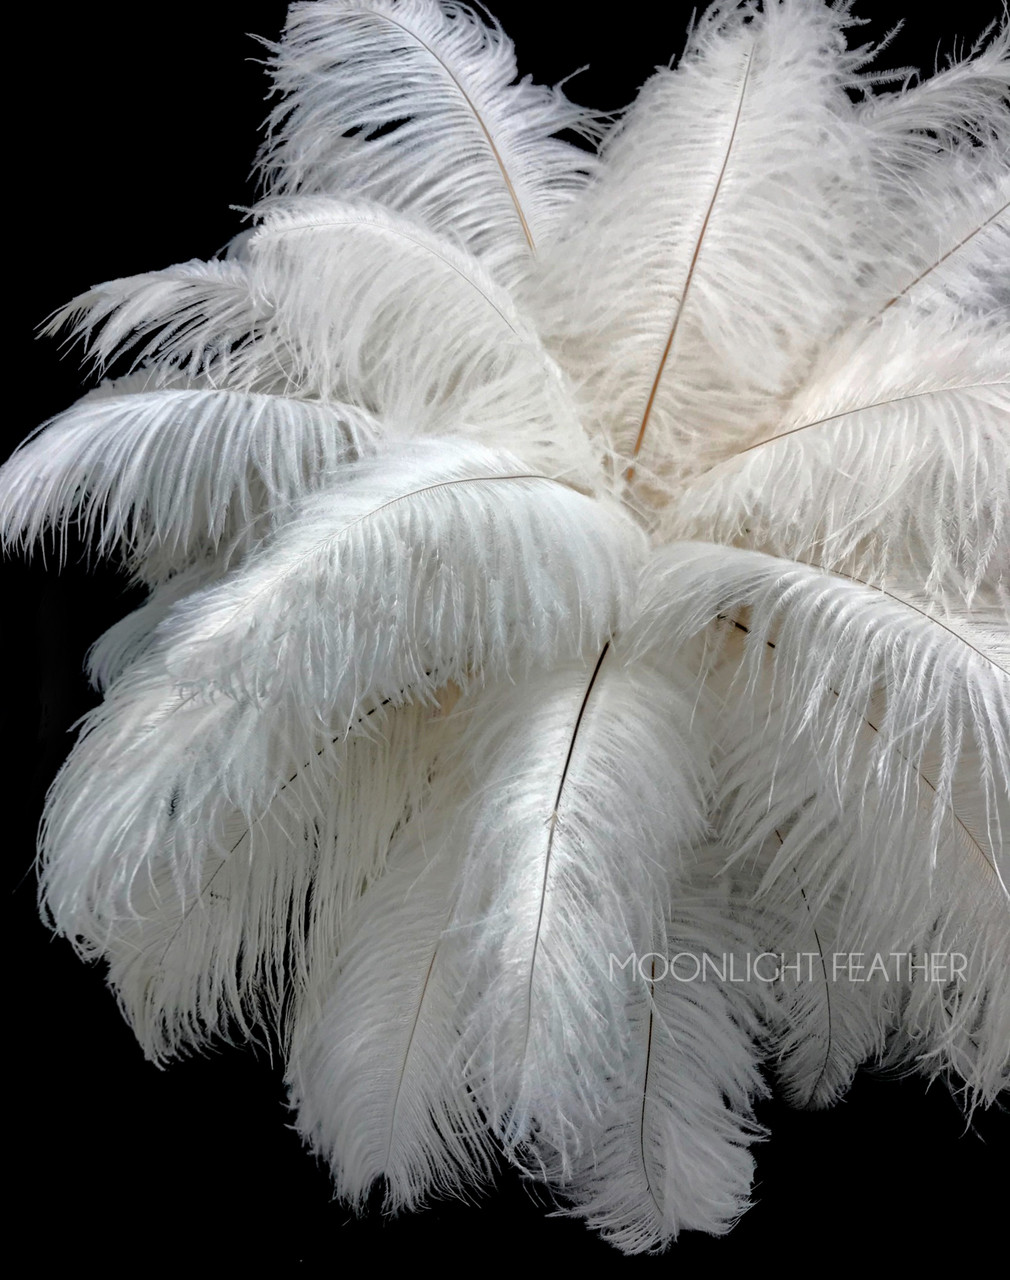 White Ostrich Feathers, Craft Supplies, Feathers And Shells, Bulk Craft  Accessories, 24 Pieces, White 